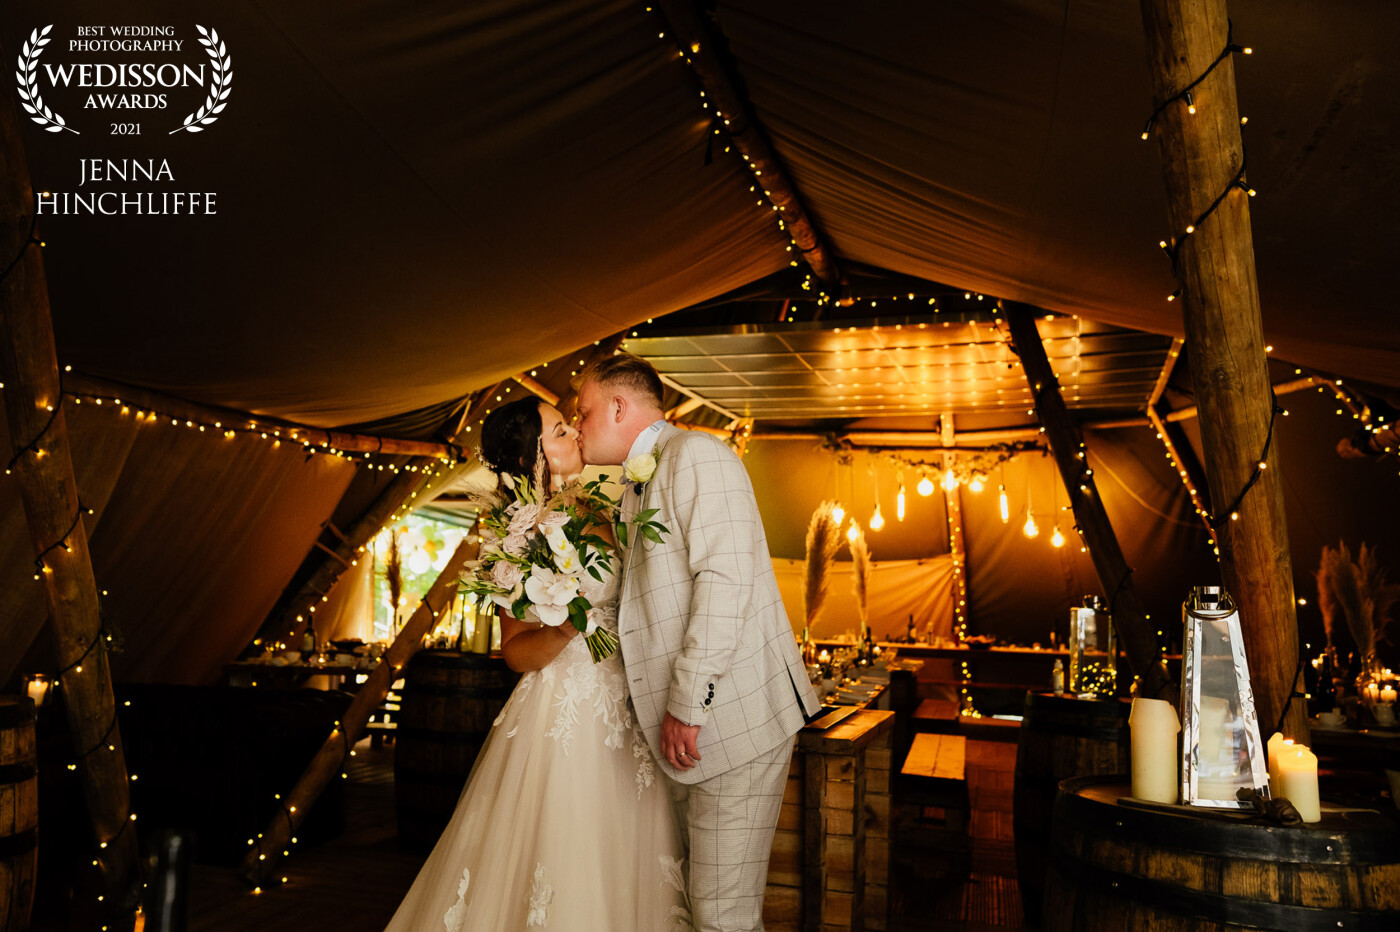 The yurt at this wedding looked so cosy and inviting! I knew it would be the perfect magical background for my couple so we made the most of it before their guests sat down to eat.